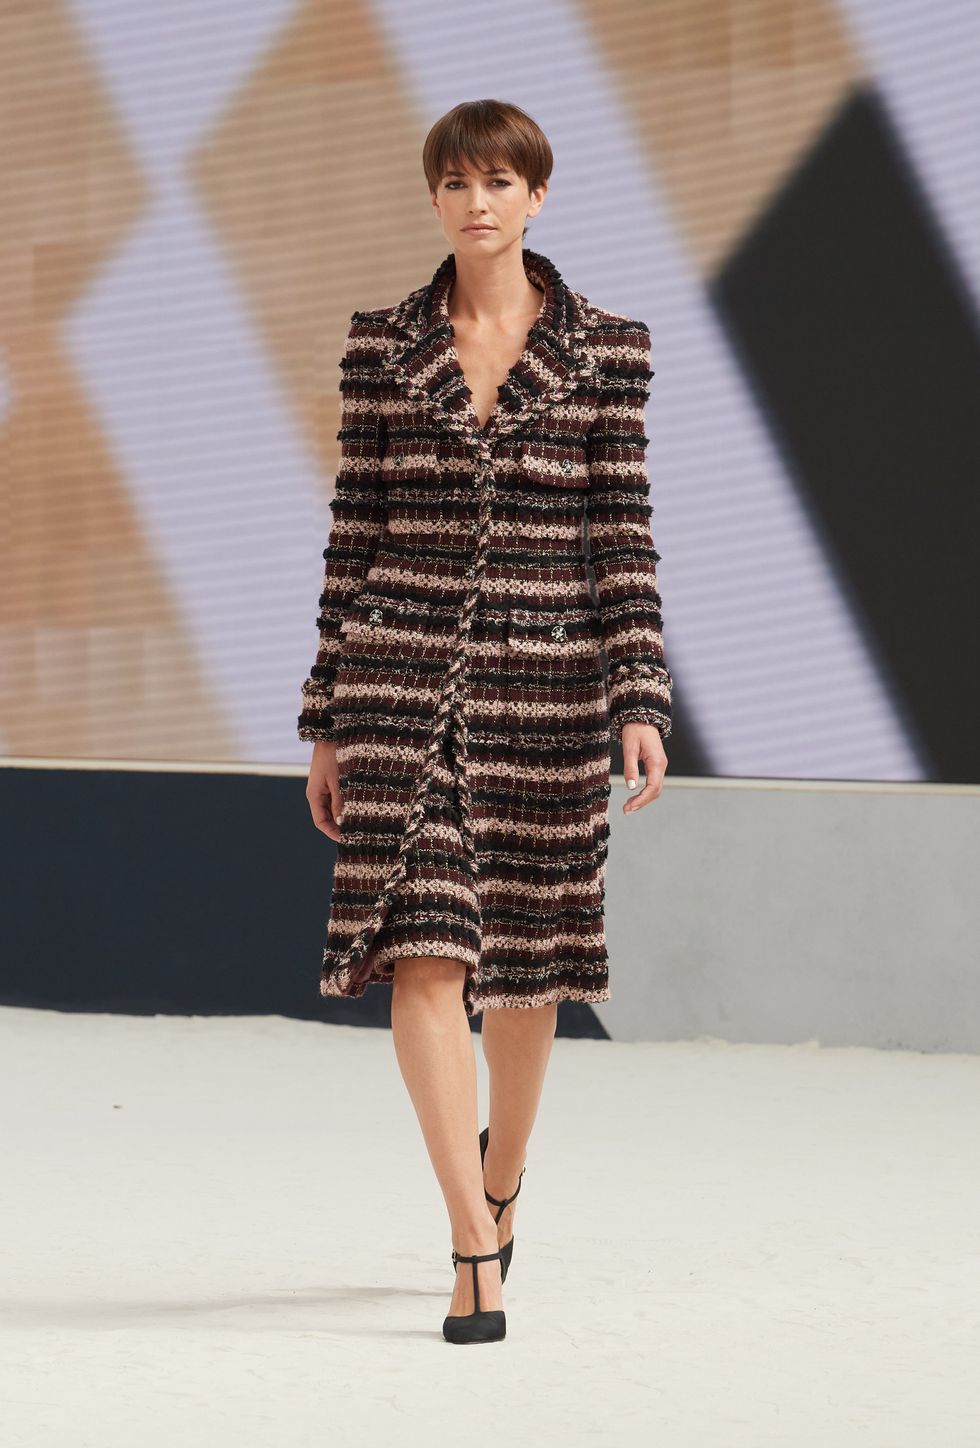 Chanel Fall Winter 2013 Haute Couture: What To Expect?